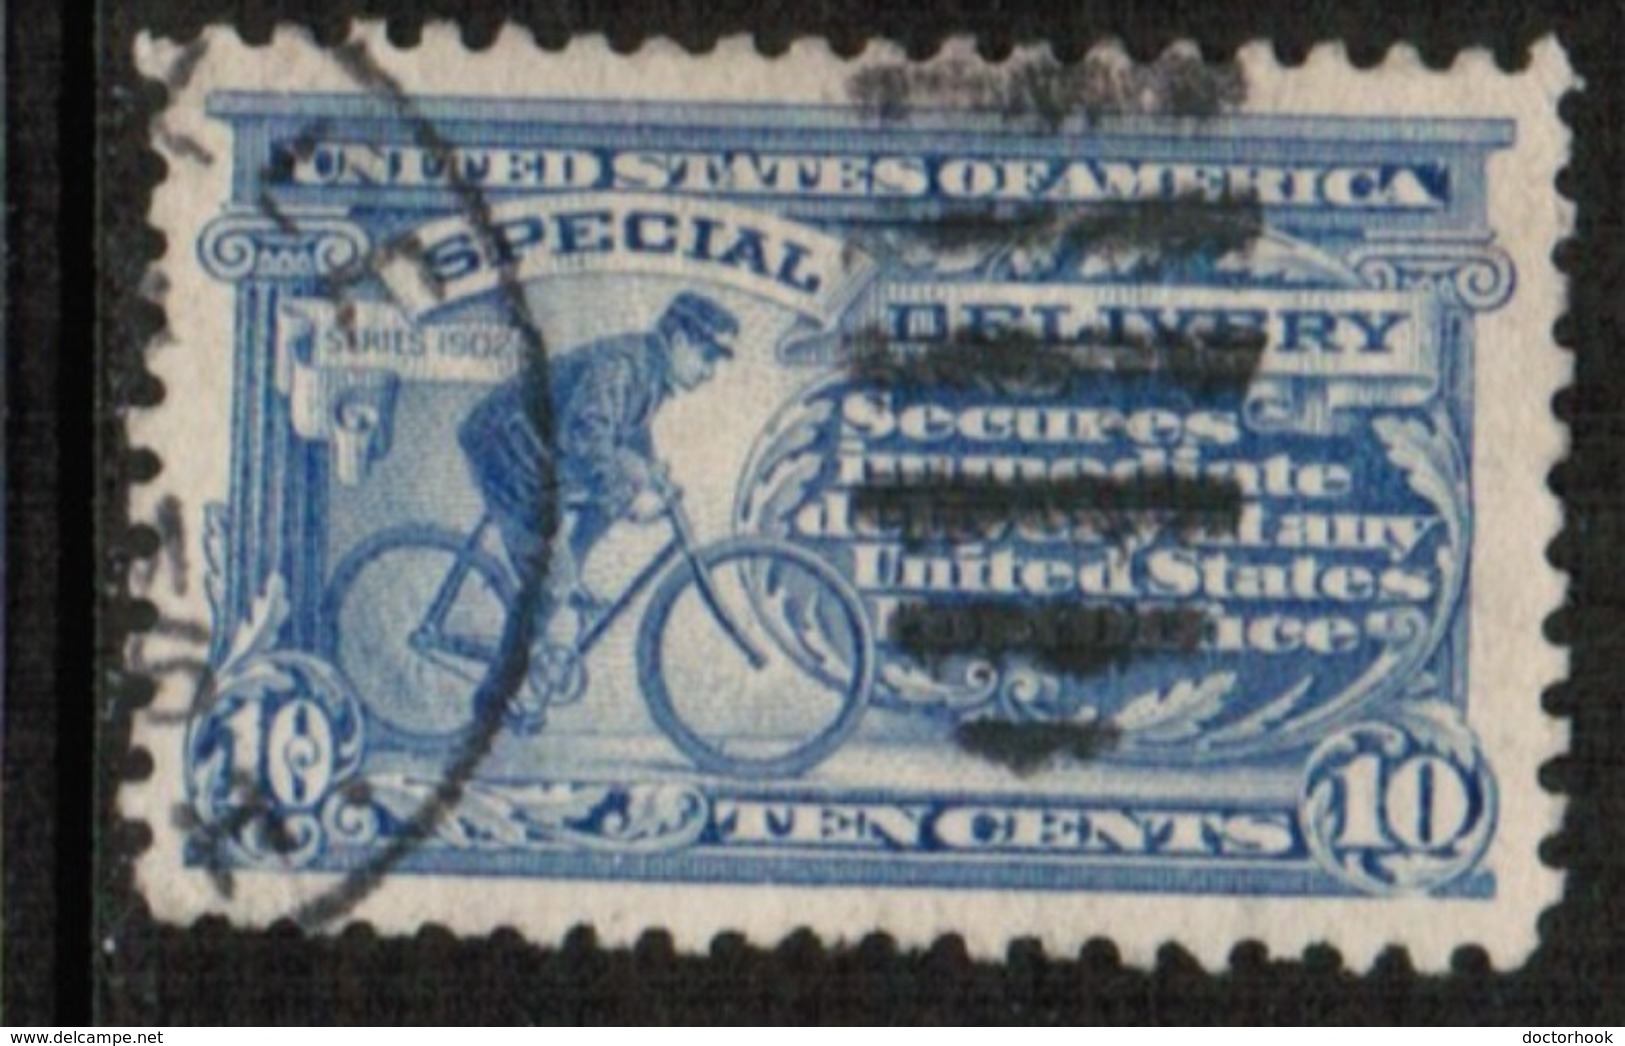 U.S.A.  Scott # E 9 VF USED (Stamp Scan # 600) - Special Delivery, Registration & Certified